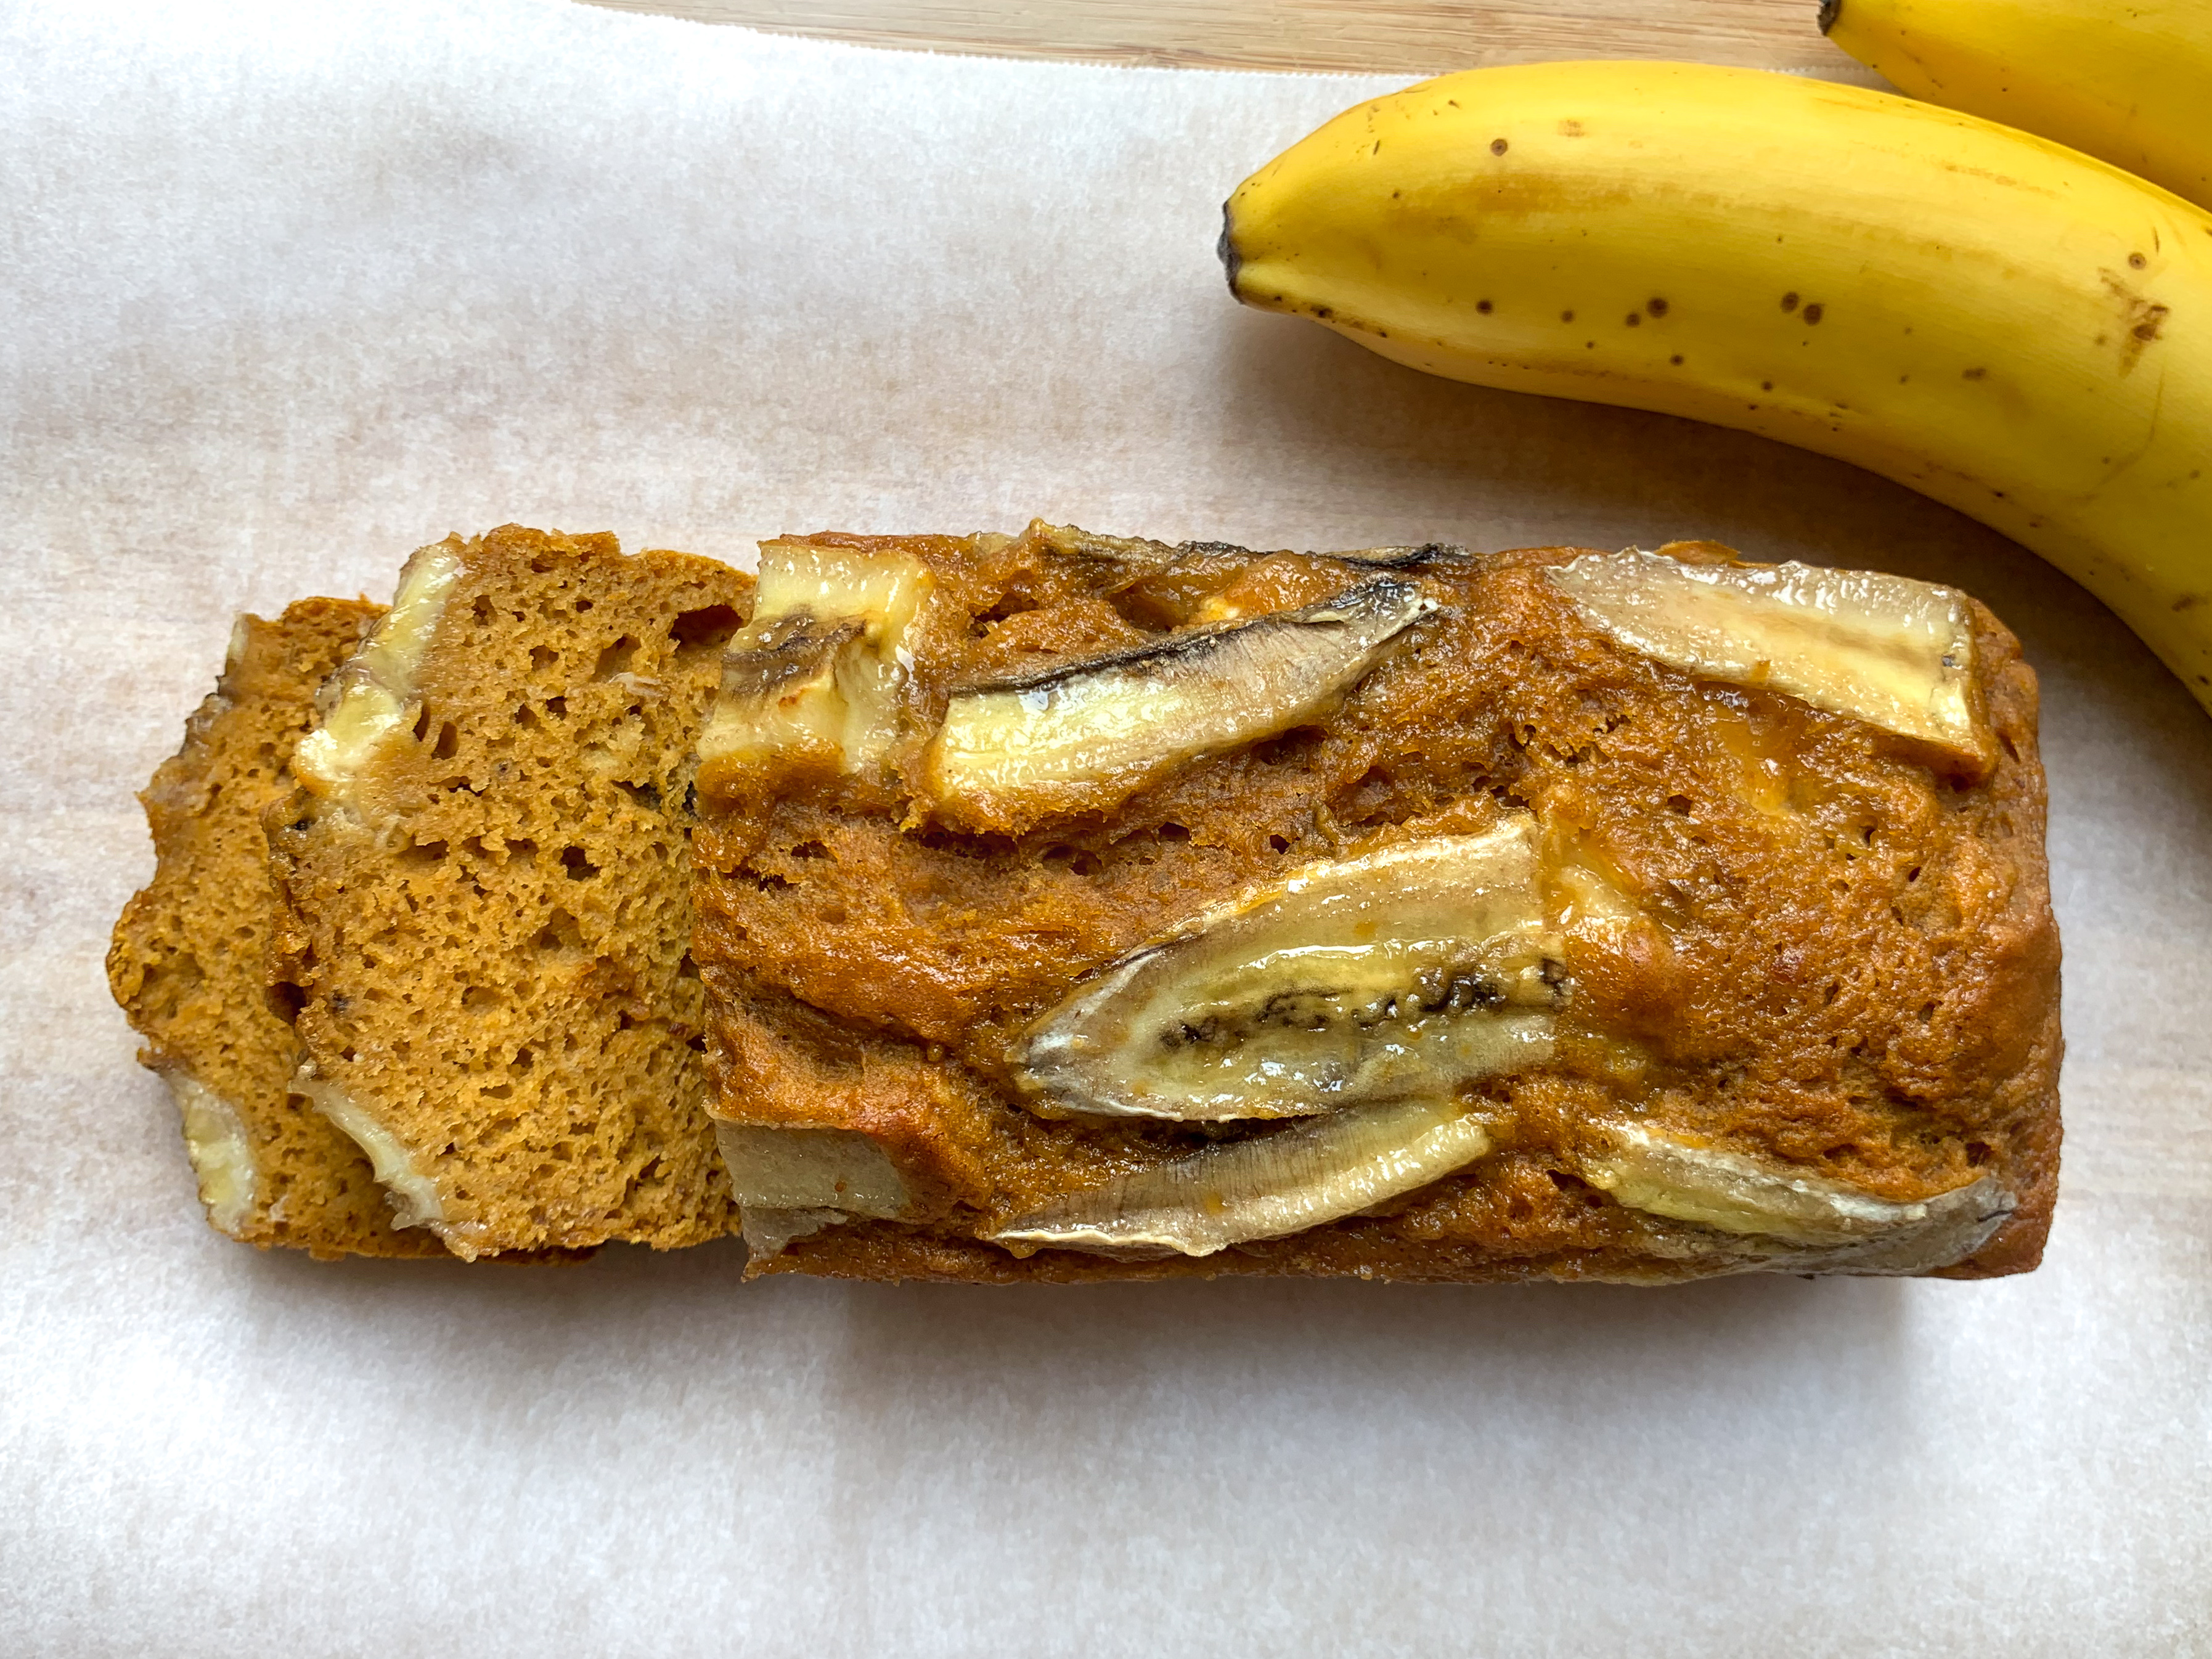 fat free pumpkin puree banana bread low fat, skinny, hearty and perfect for the fall. full of cozy autumn flavors and so low in calories! a must have for thanksgiving.